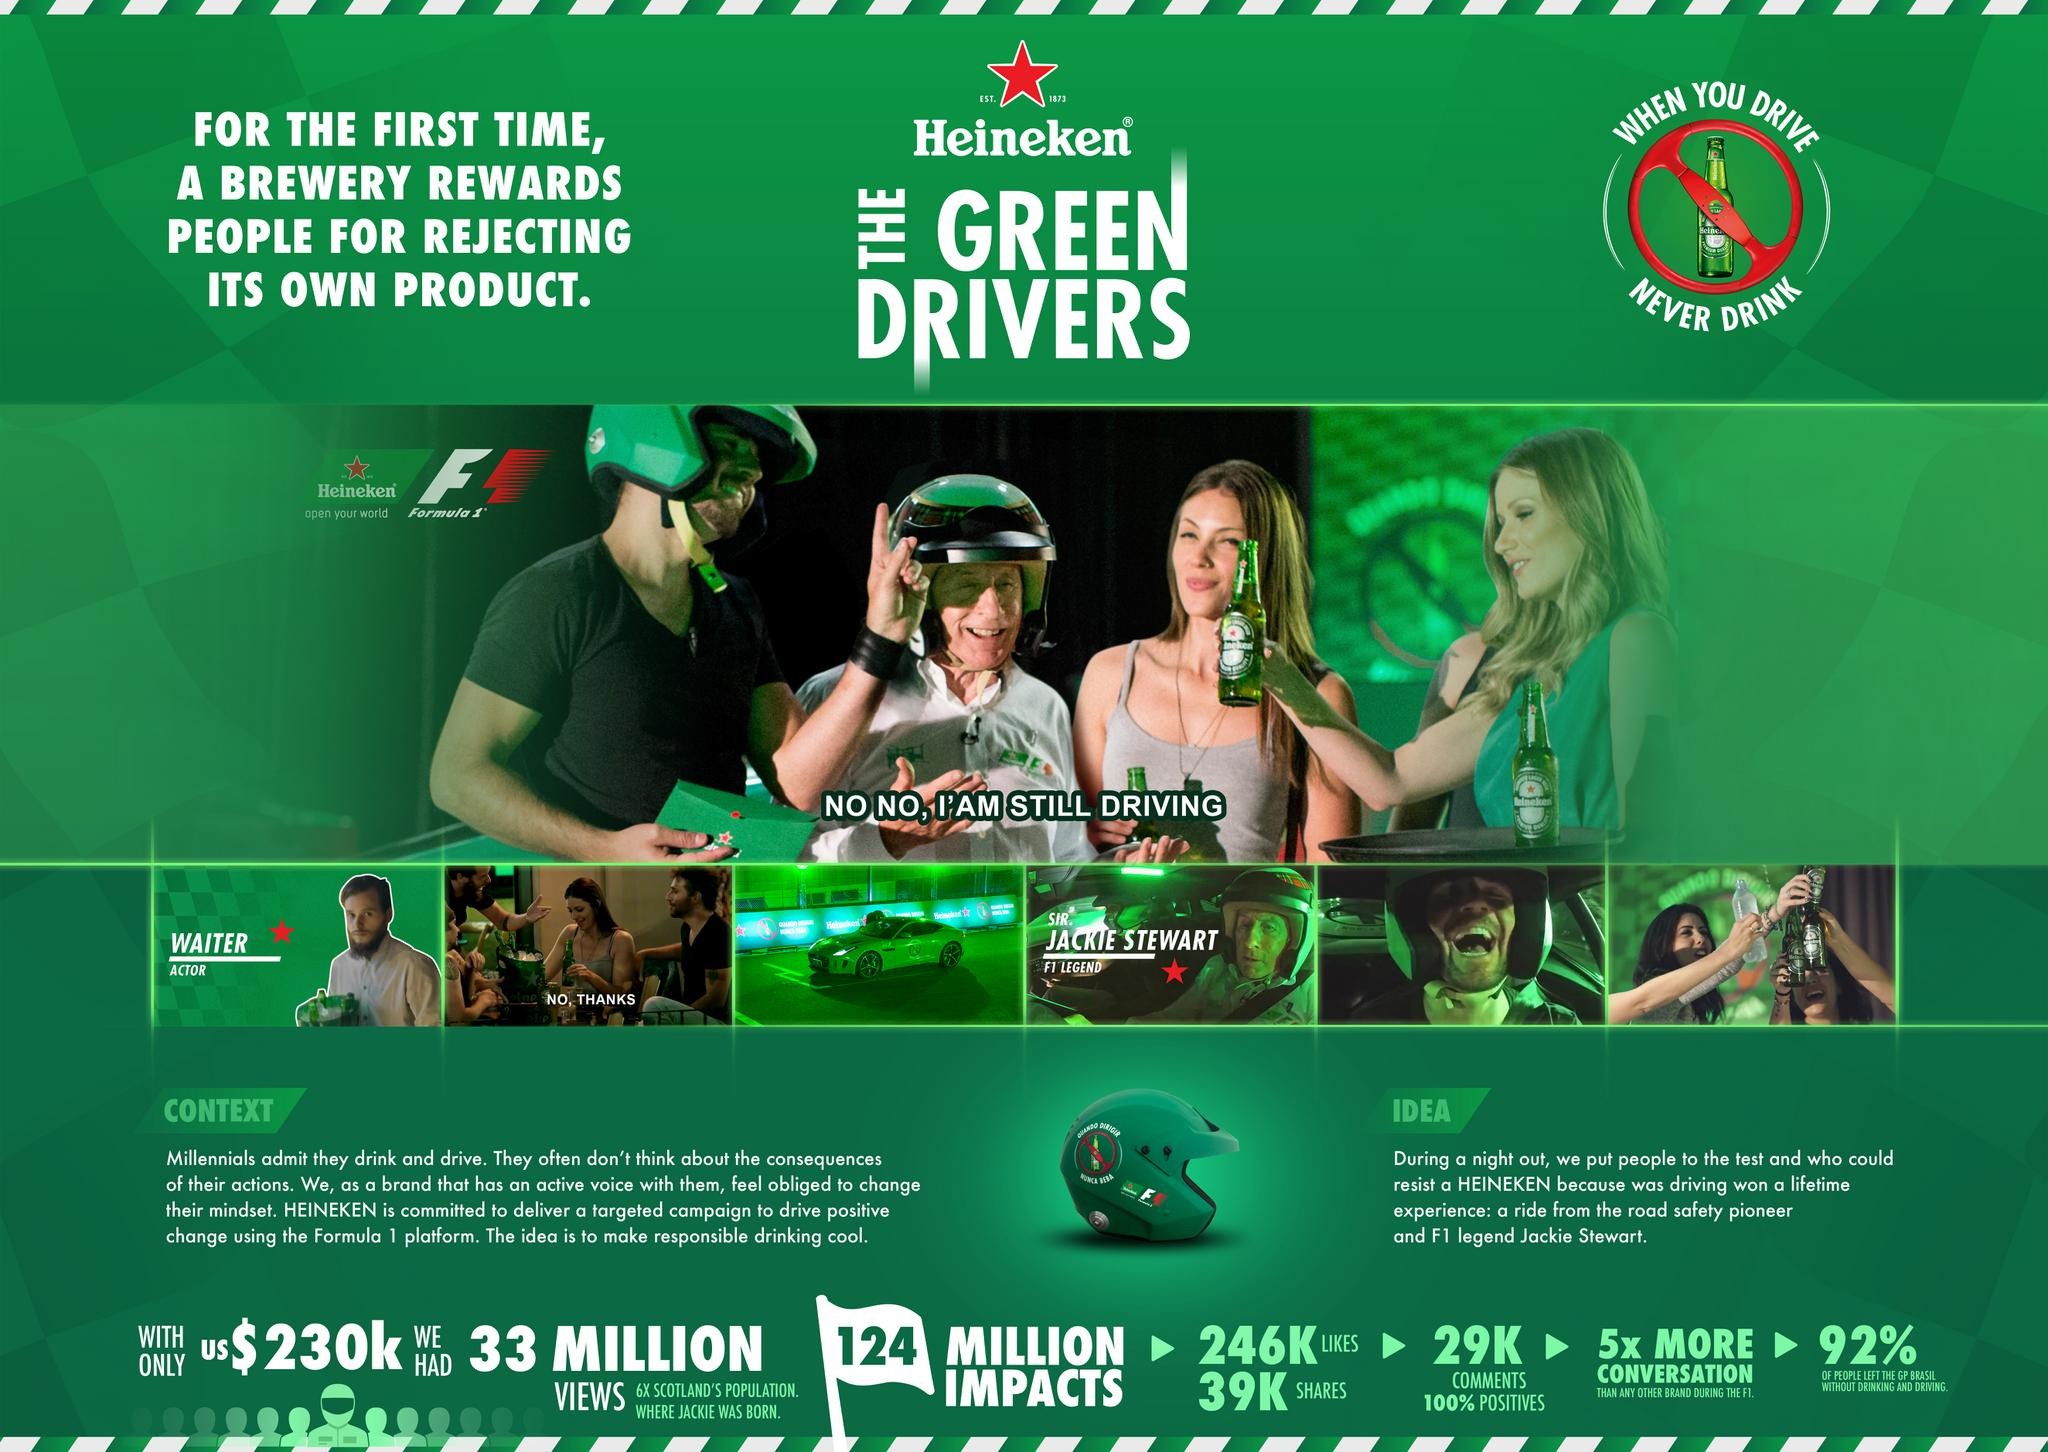 The Green Drivers